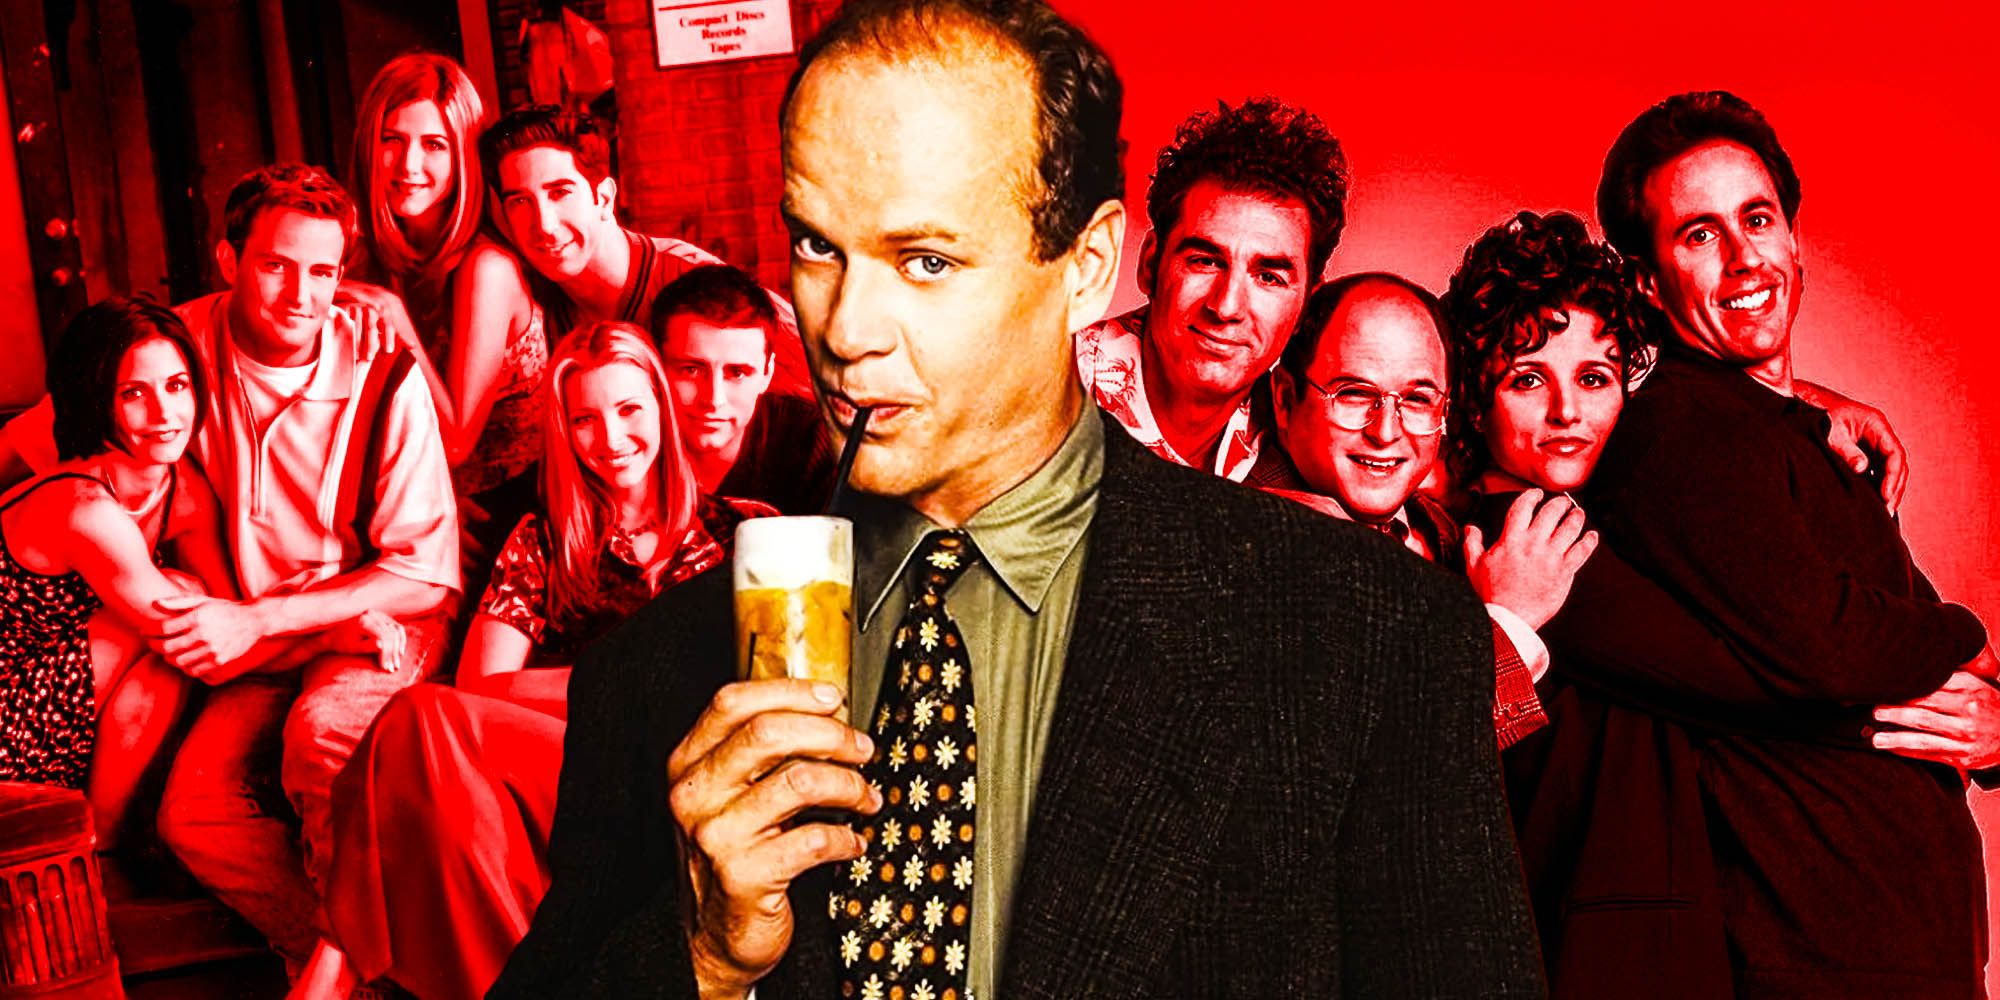 Why a frasier reboot can work but seinfeld and friends could not